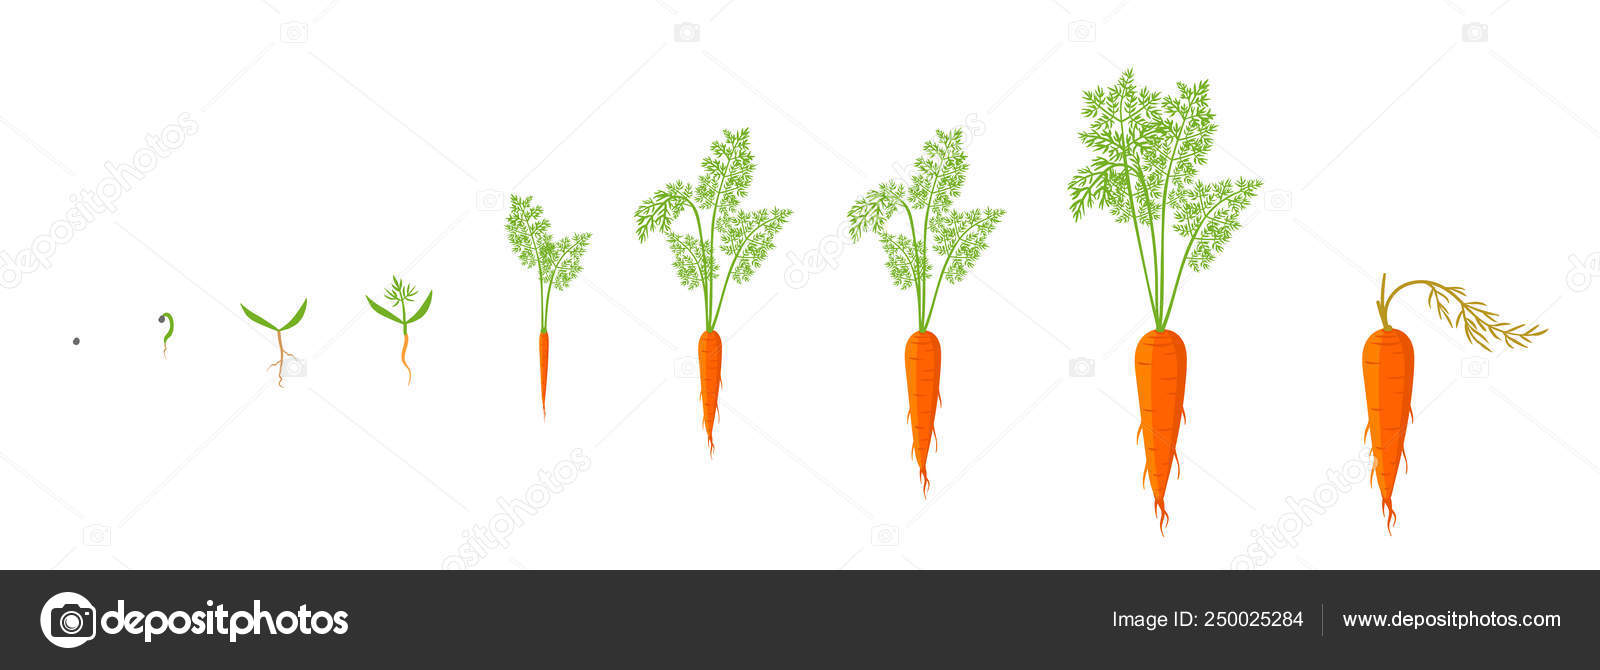 Growth stages of carrot plant. Vector illustration. Daucus carota ...